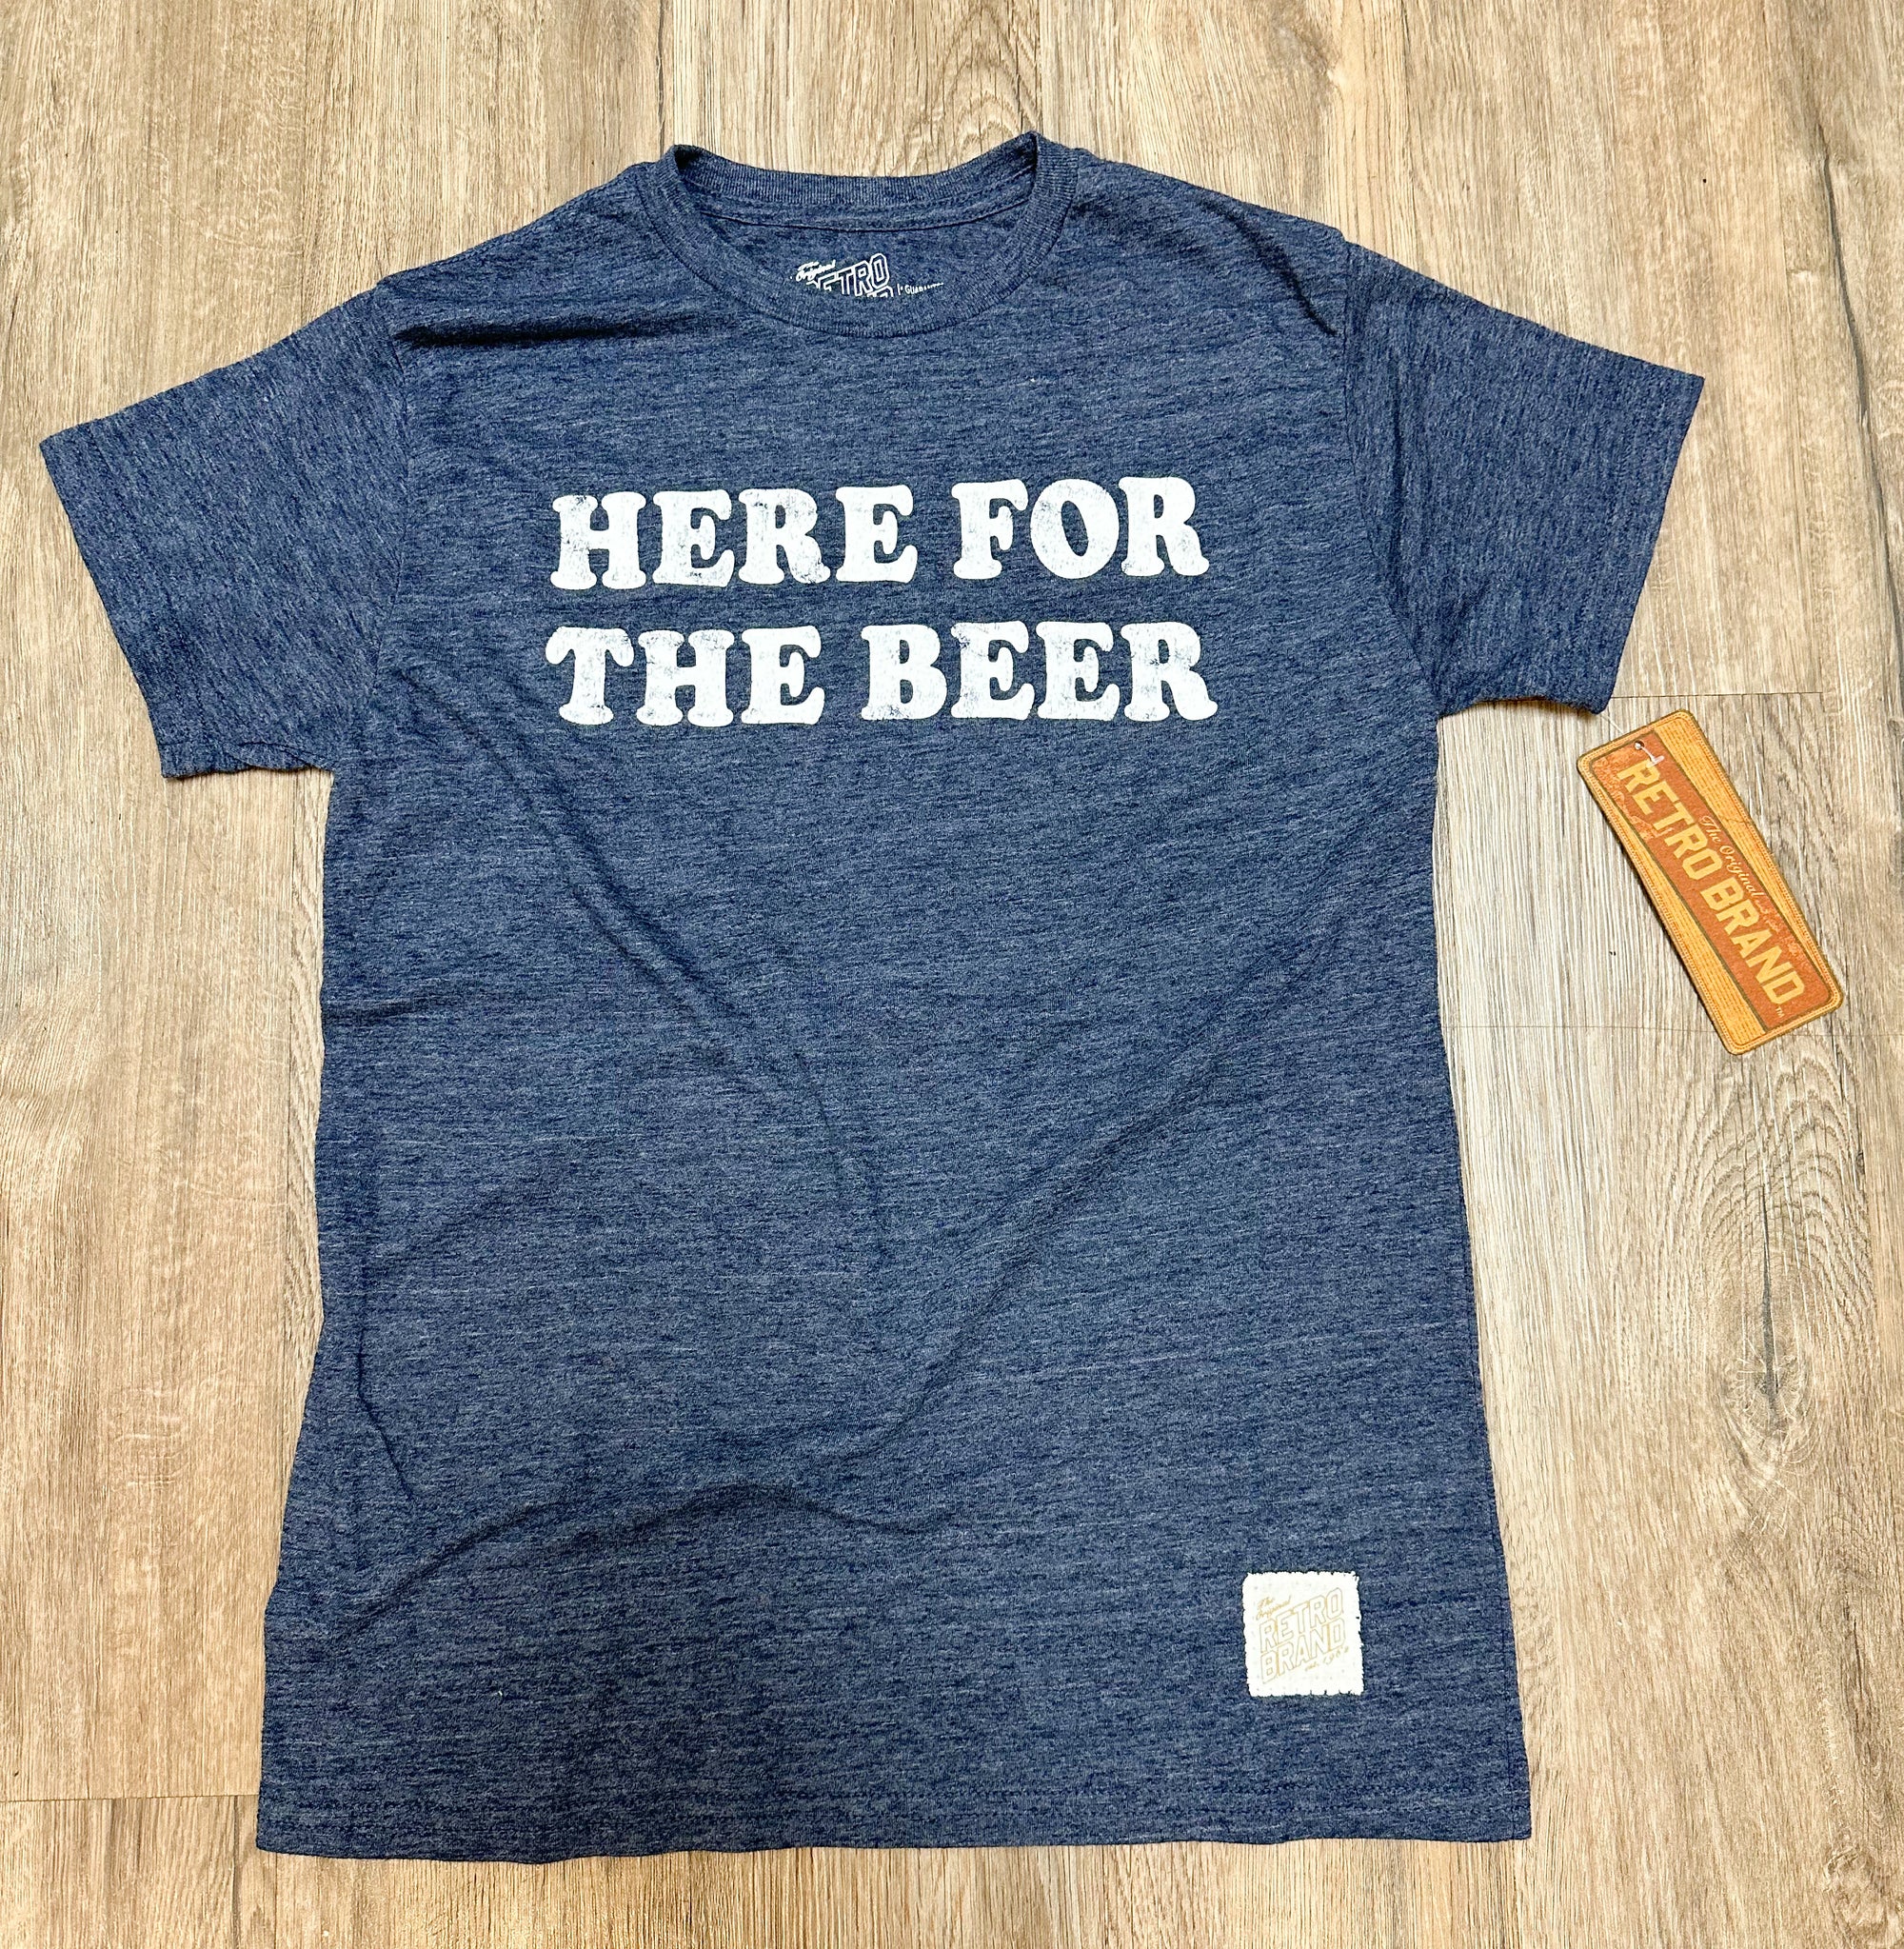 The Retro Brand Here for the Beer Tee